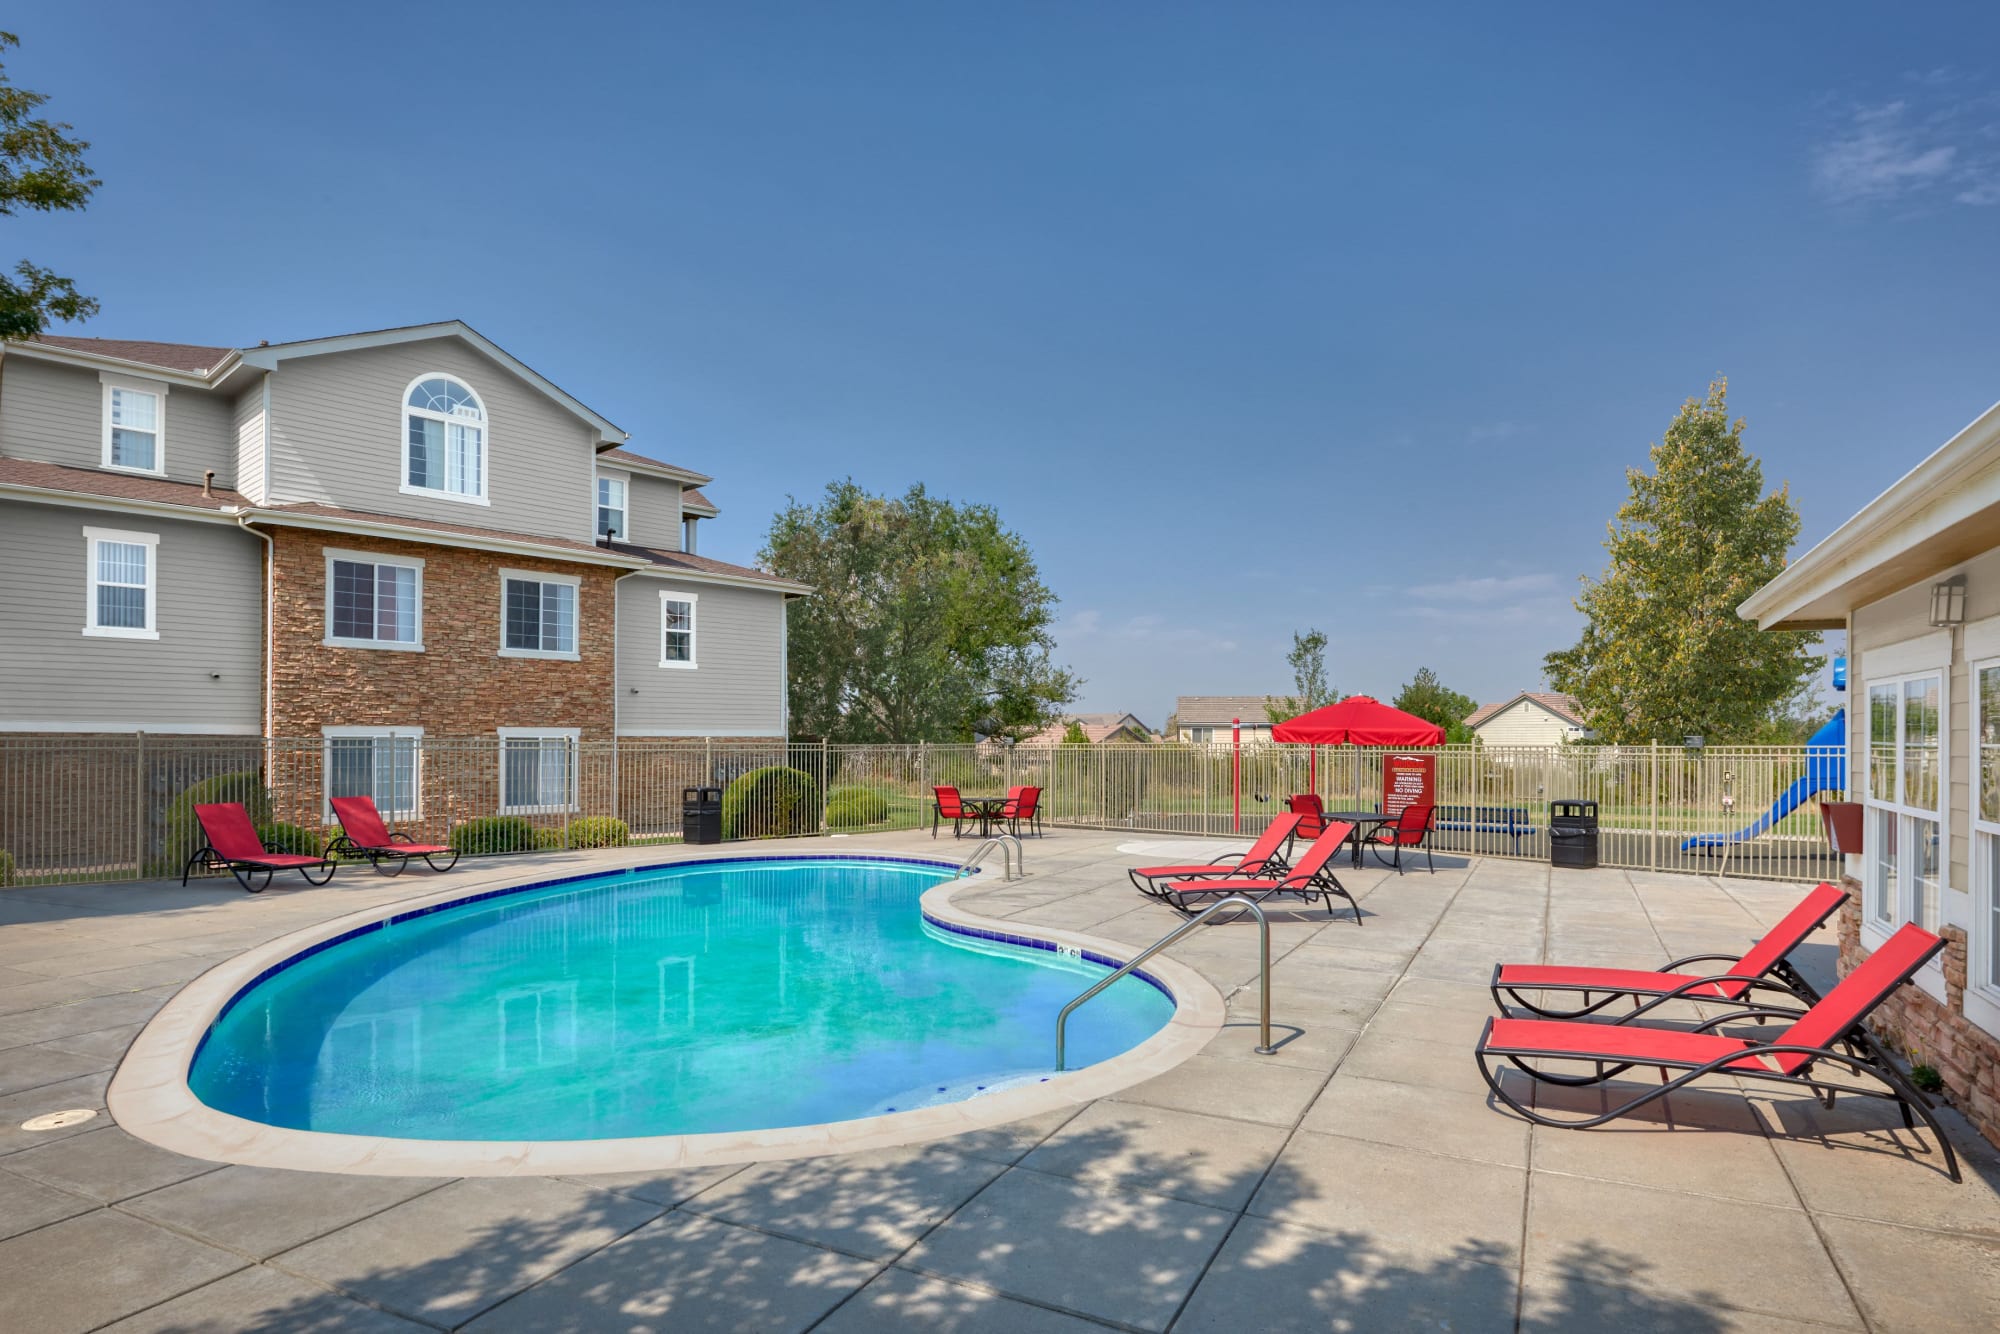 Pool and spa with lounge chairs and umbrellas at Westridge Apartments in Aurora, Colorado